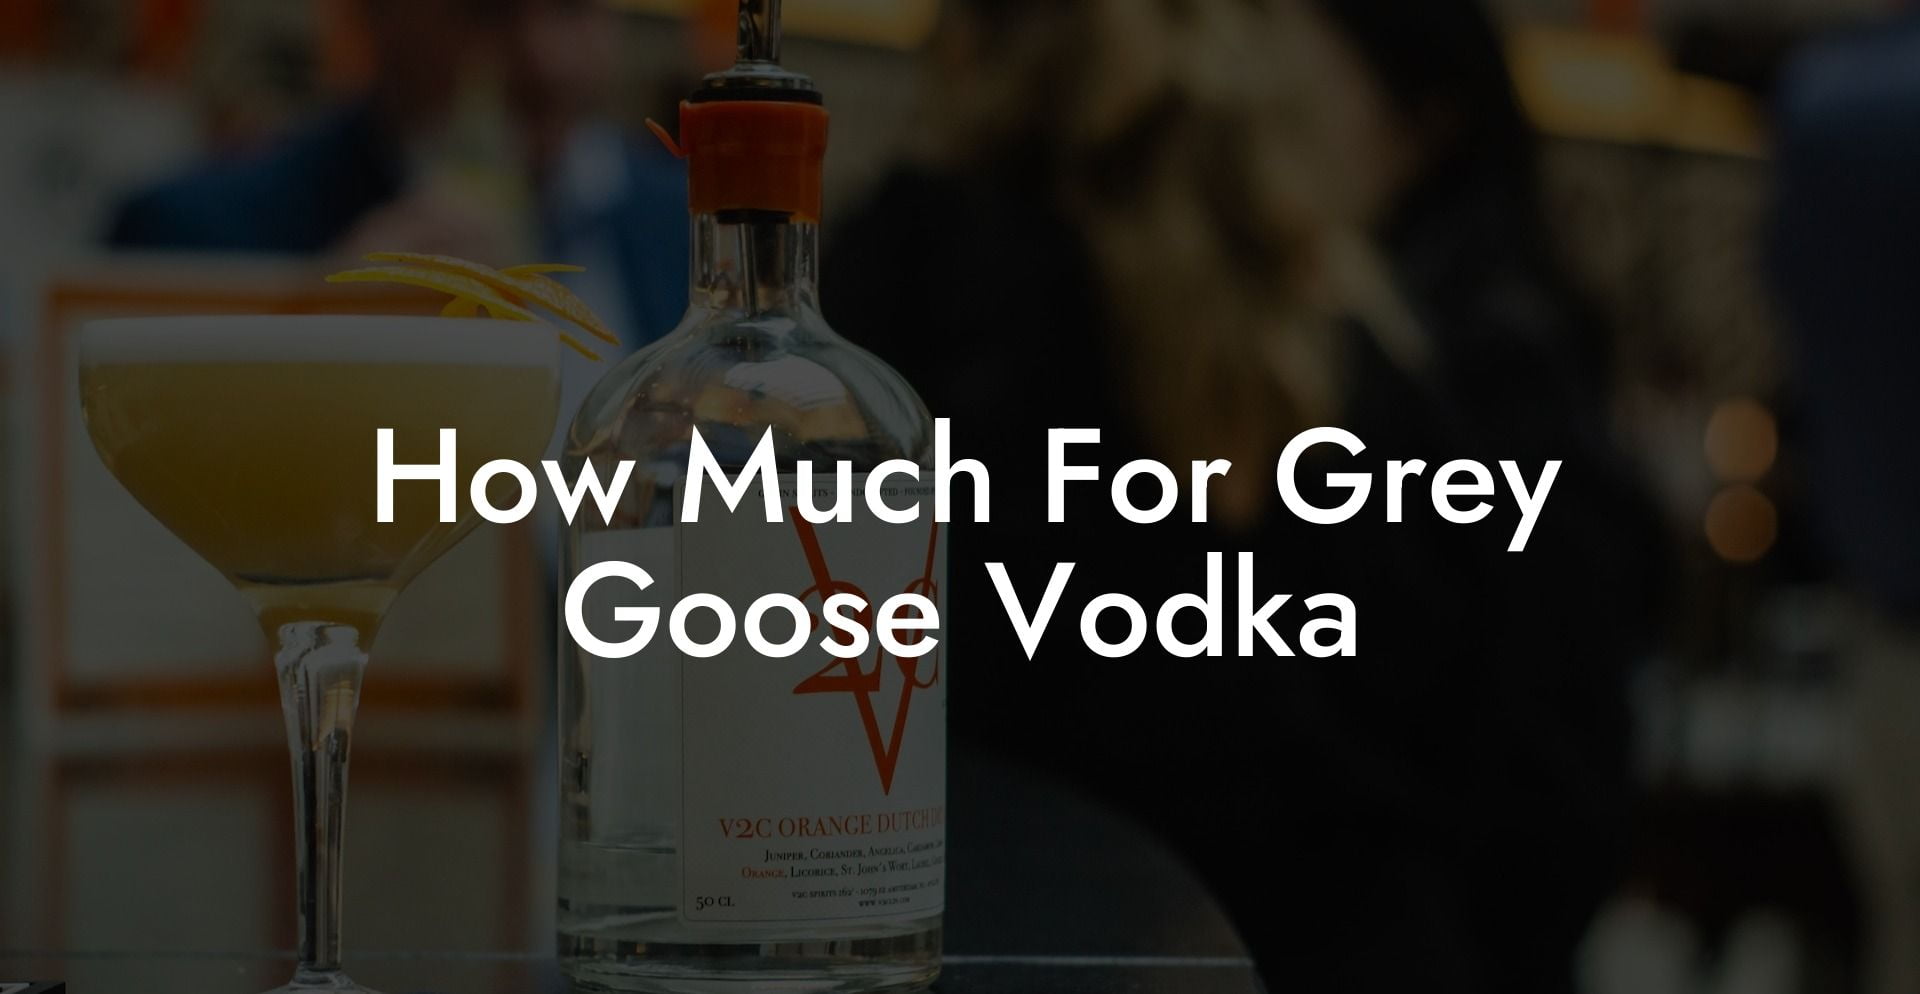 How Much For Grey Goose Vodka